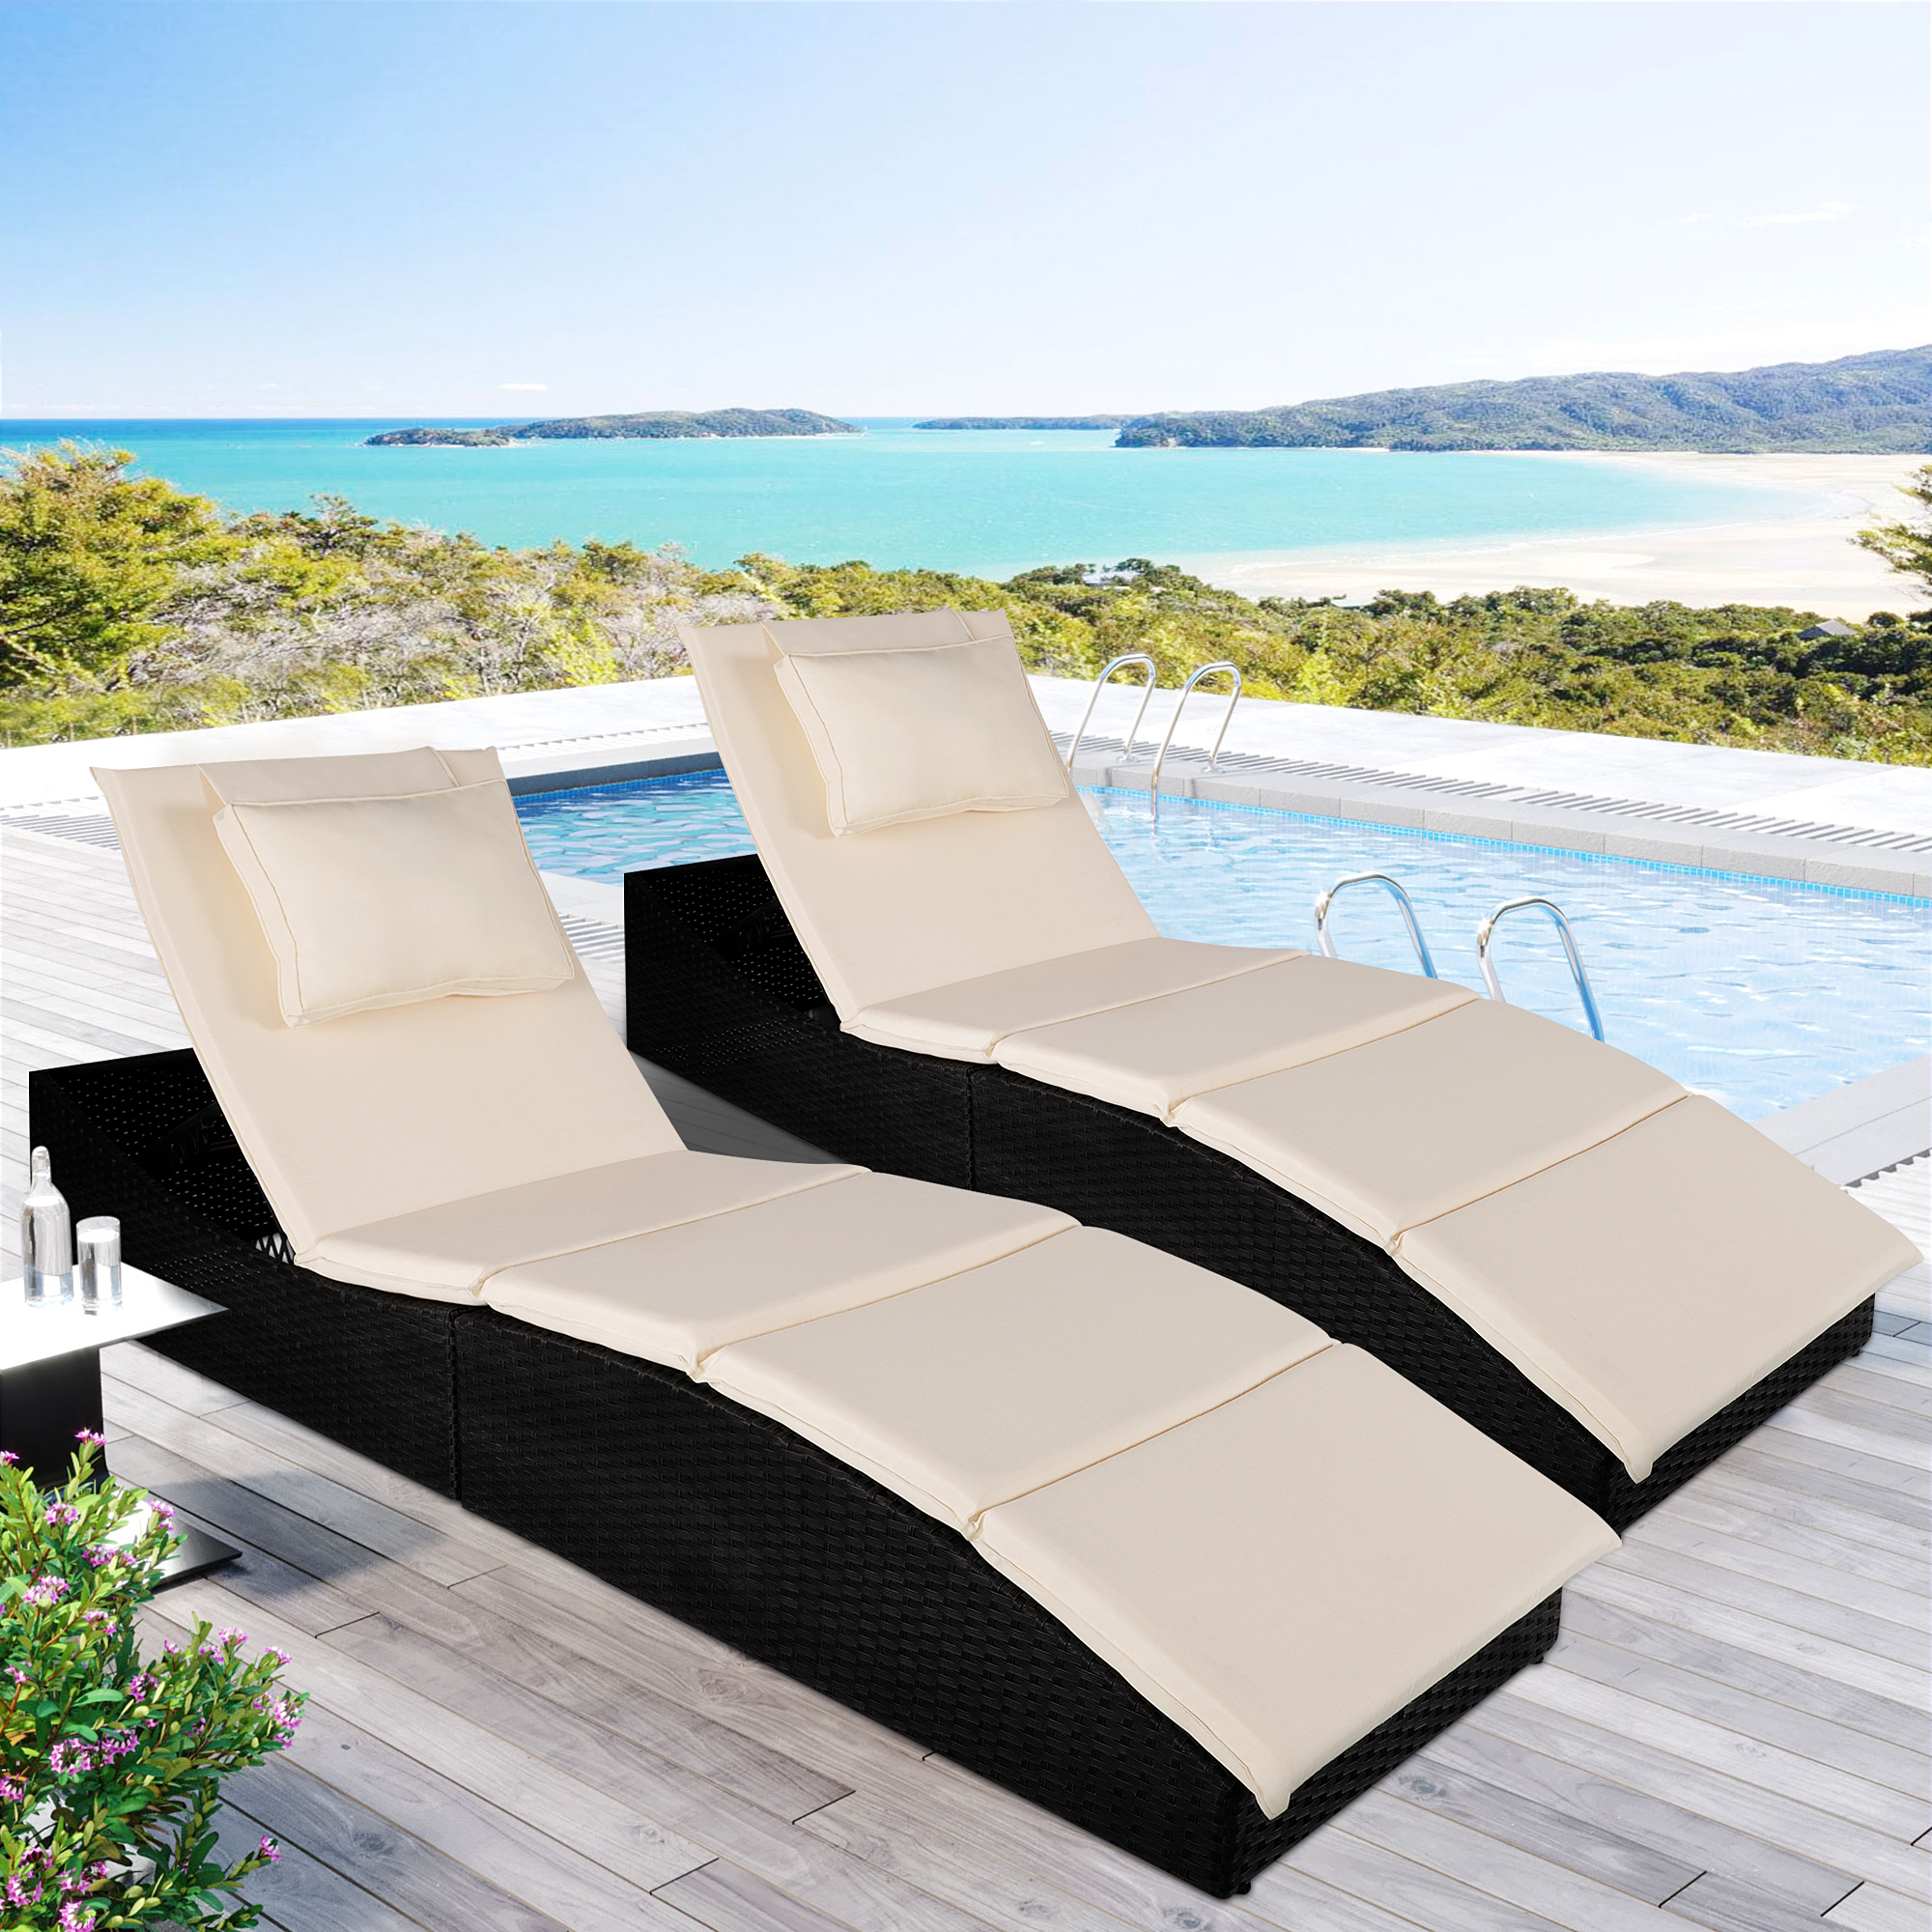 2 Piece Chaise Lounge Chairs Outdoor, enyopro Wicker Patio Chaise Loungers with Cushion, Adjustable Sun Chaise Lounge Furniture, Reclining Backrest Chaise Lounge for Back Pool Porch Garden, K3735 - image 1 of 11